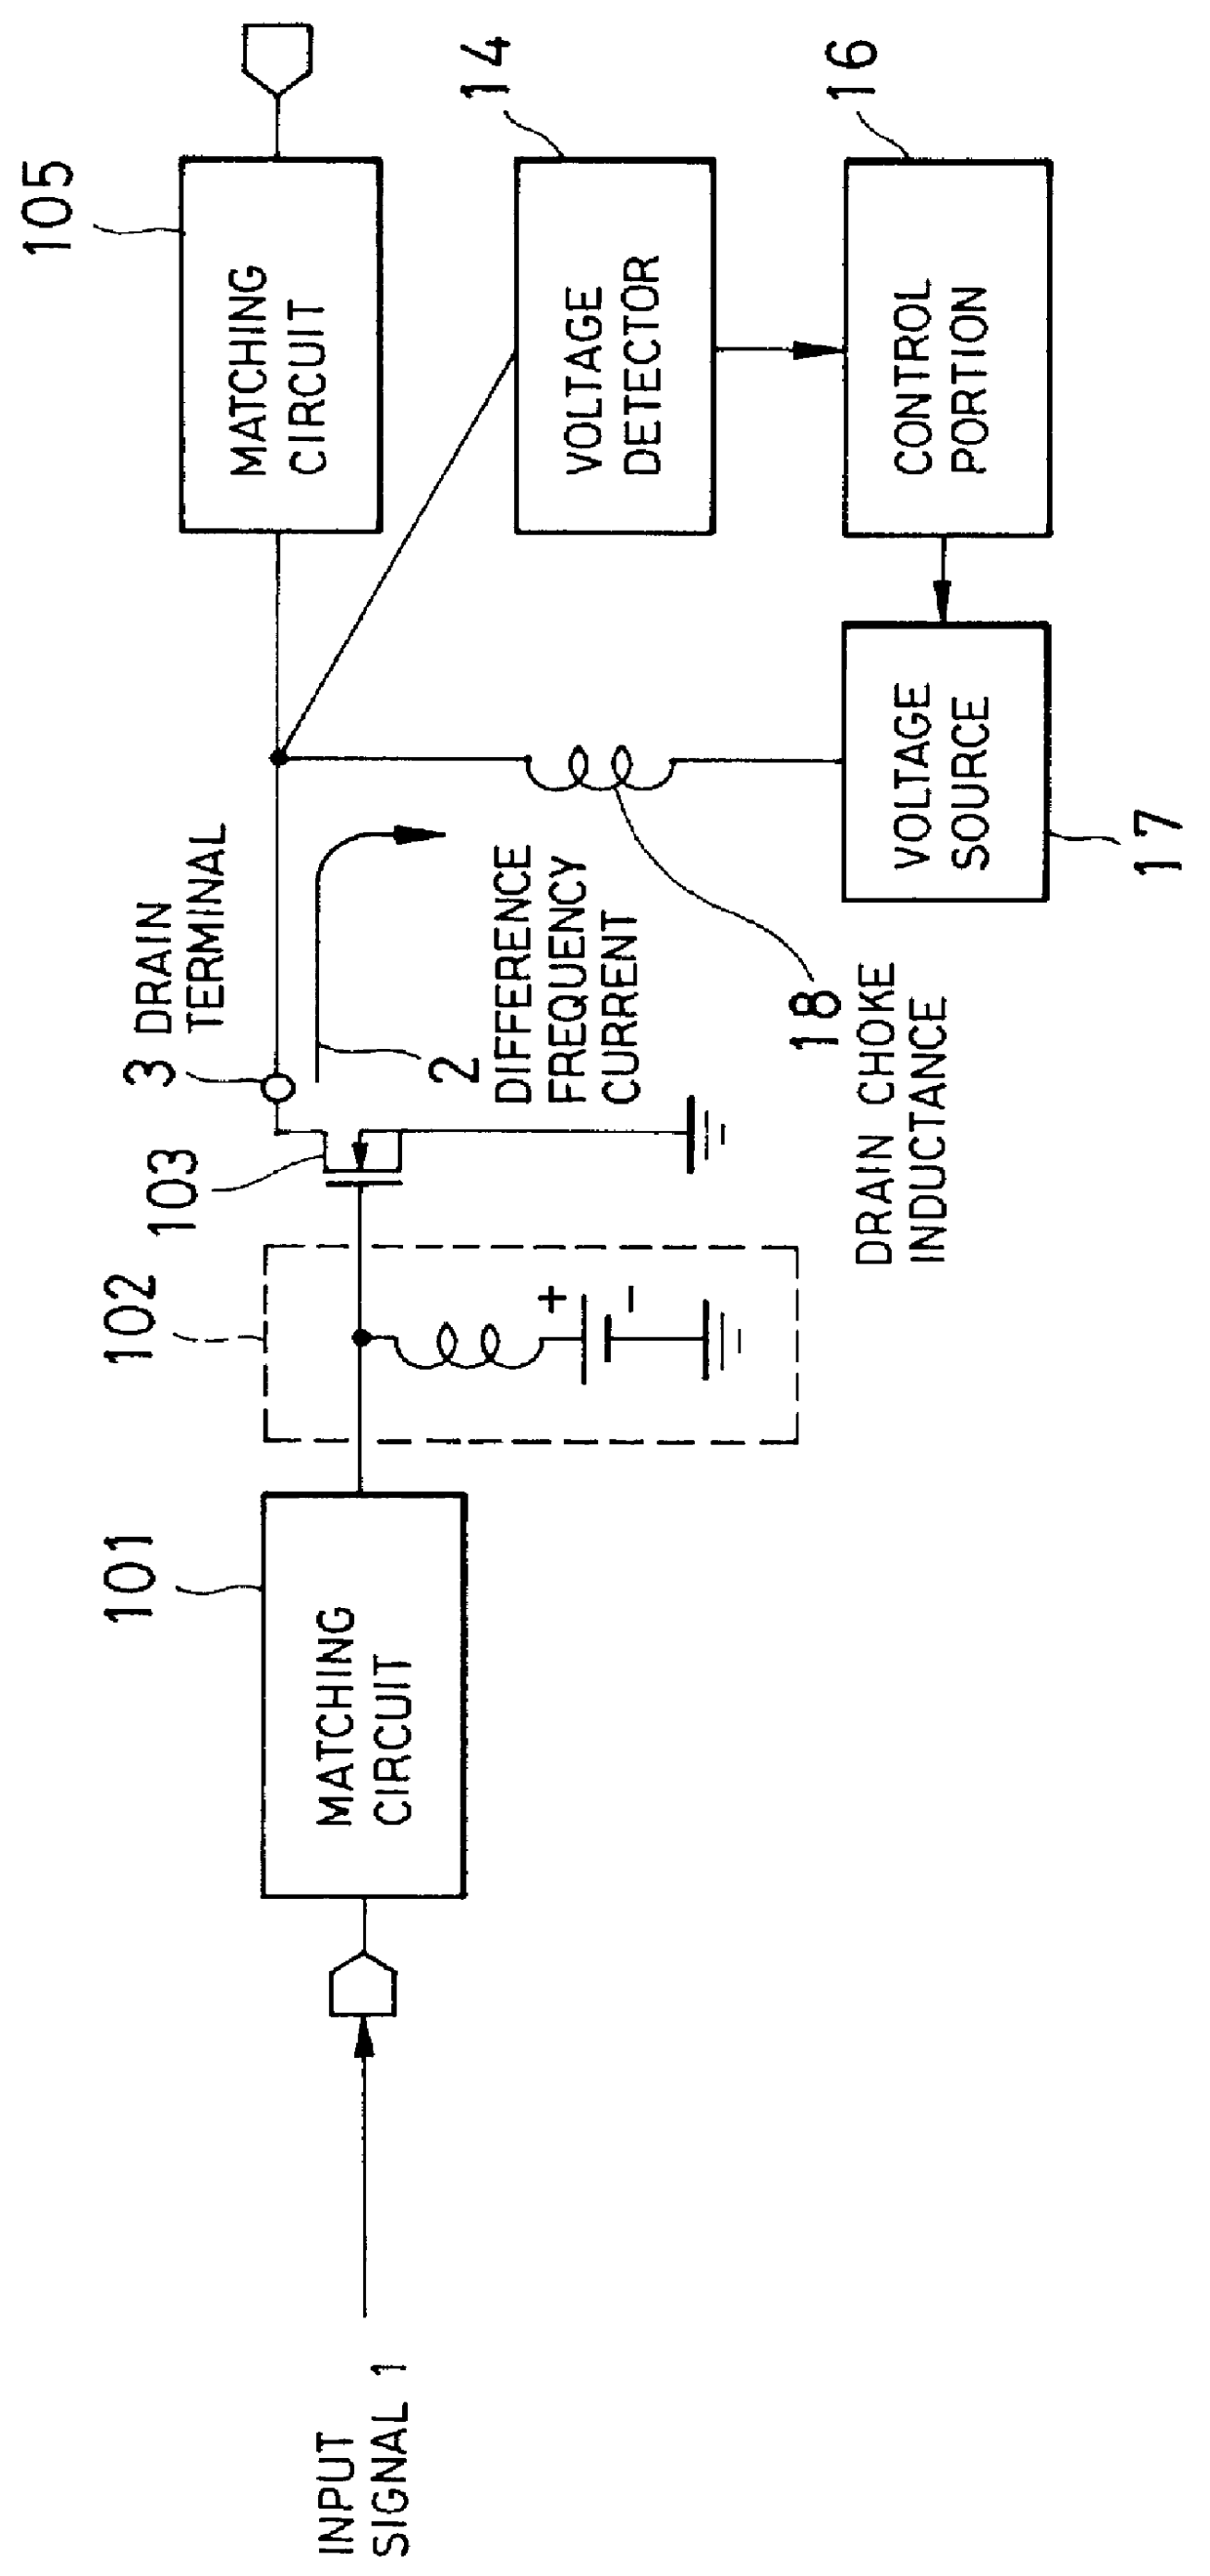 High frequency amplifier circuit